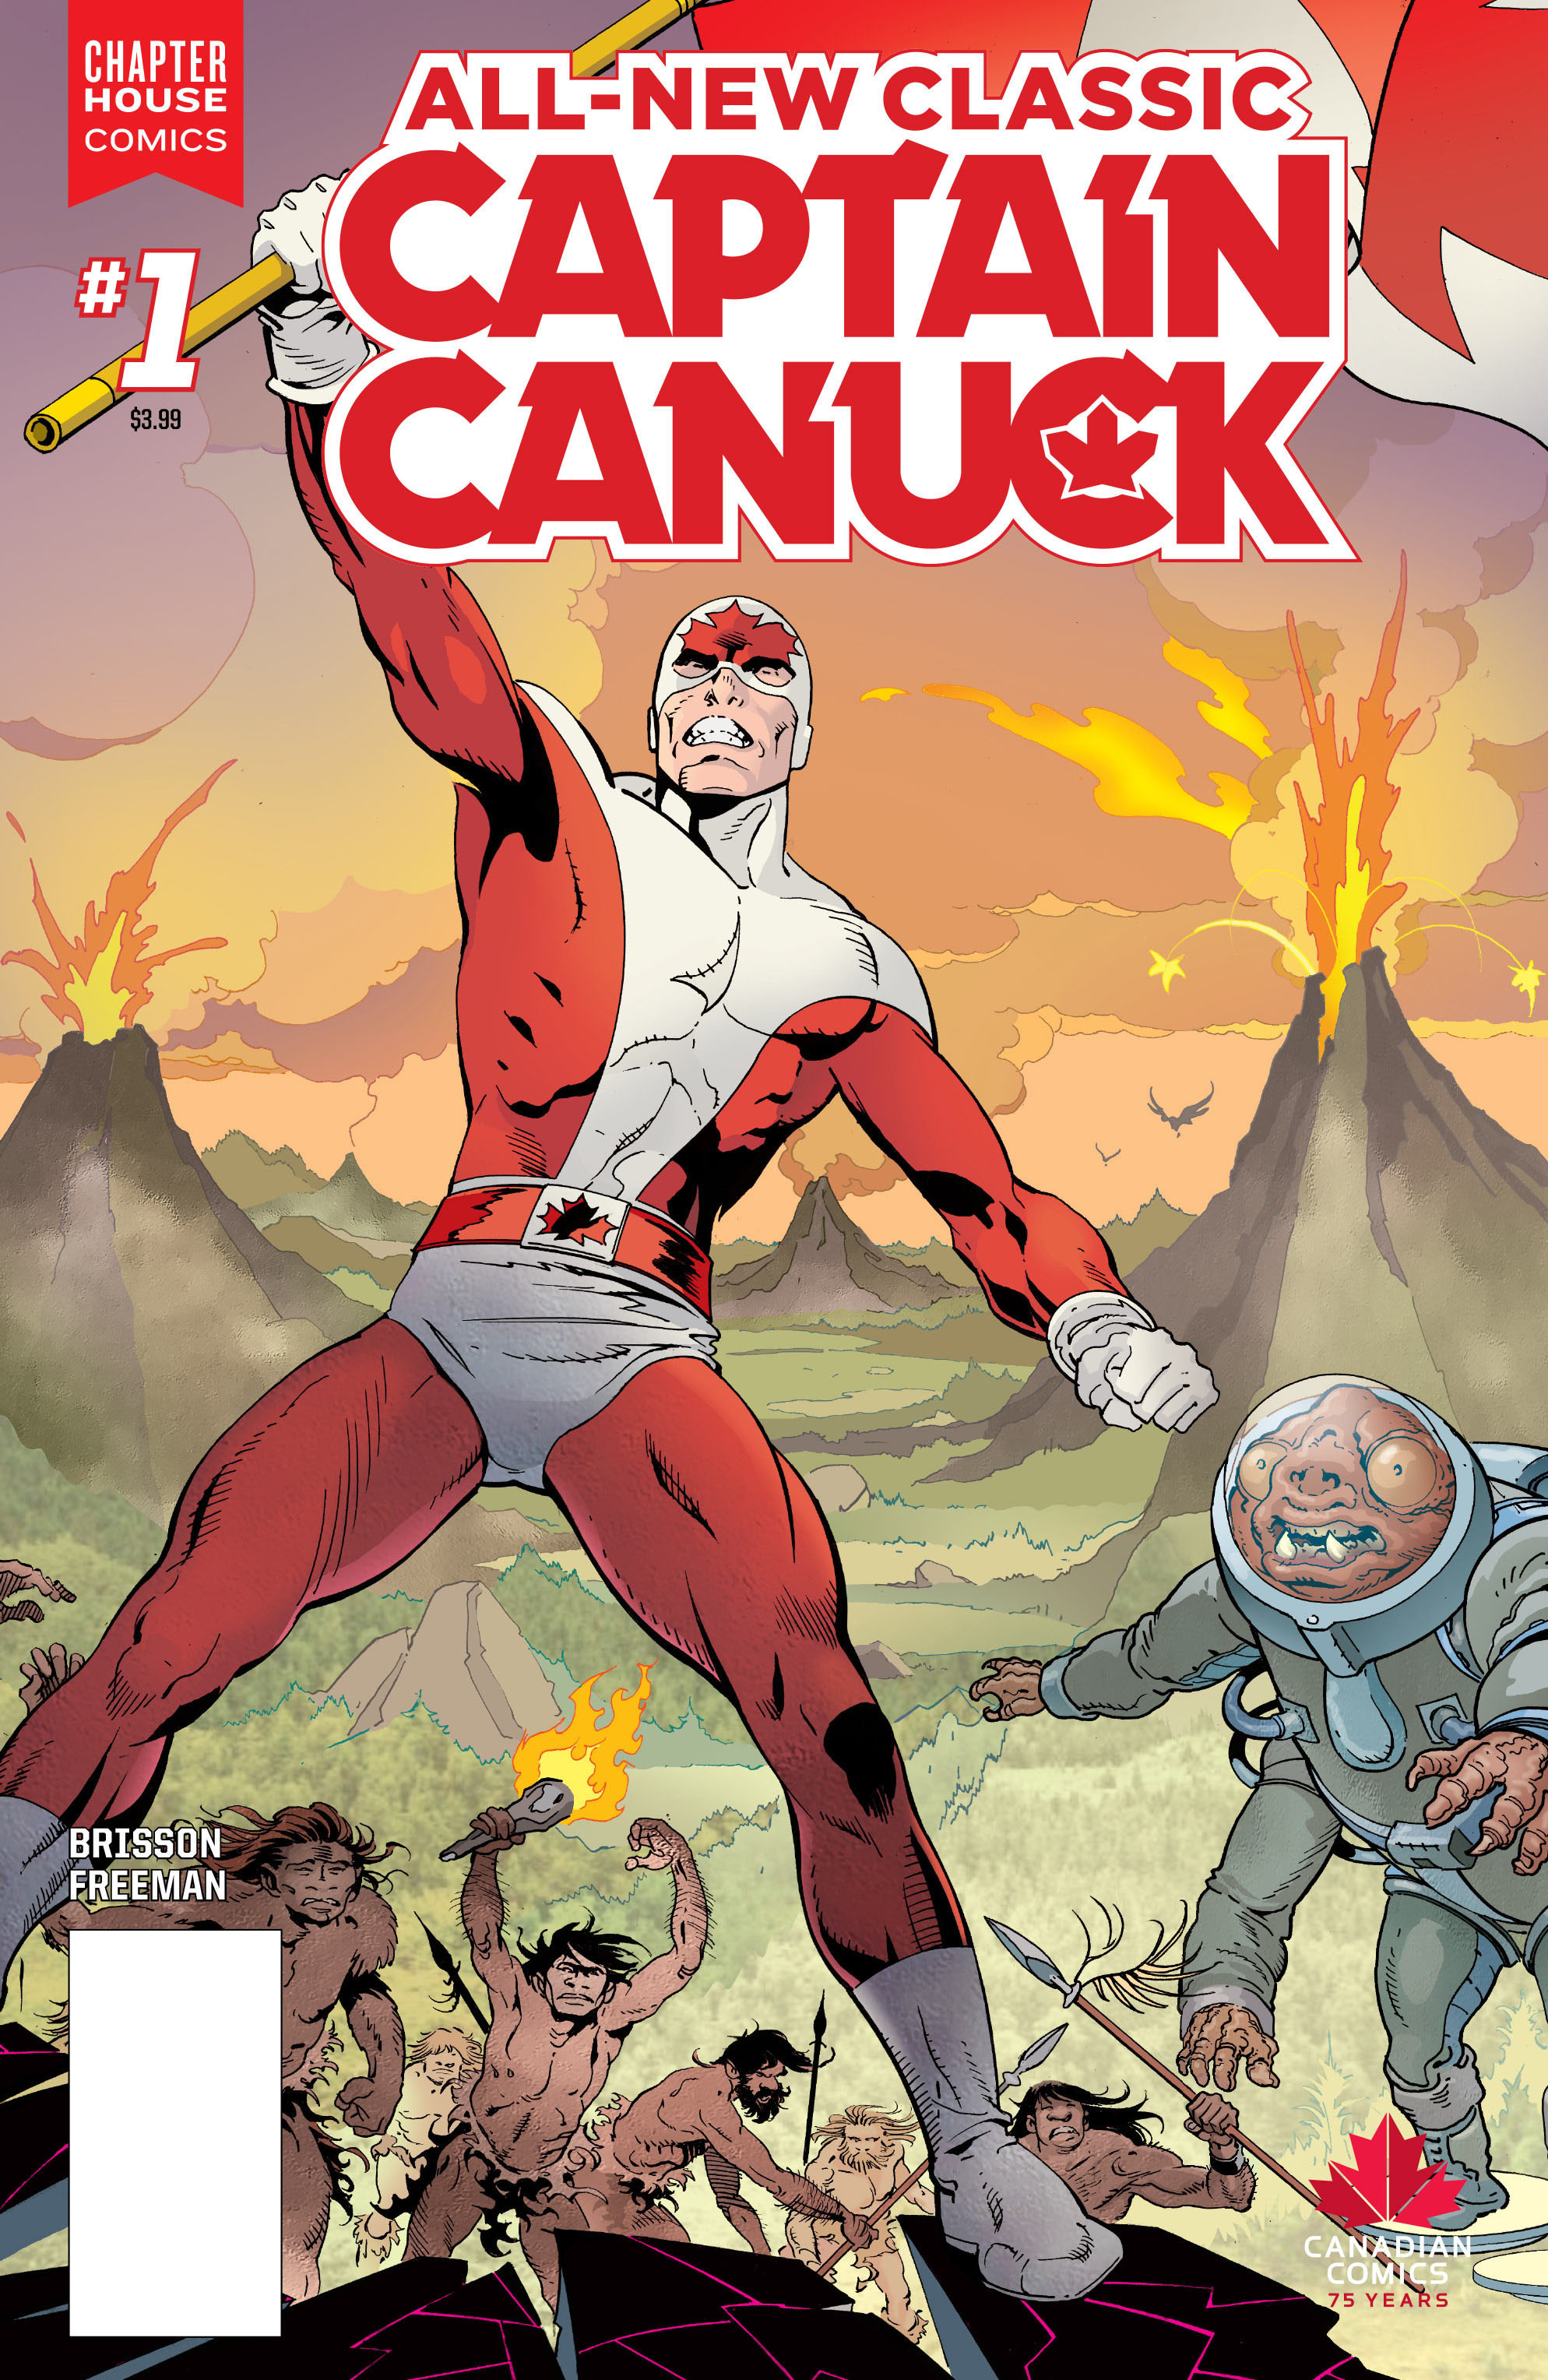 Read online All-New Classic Captain Canuck comic -  Issue #1 - 1